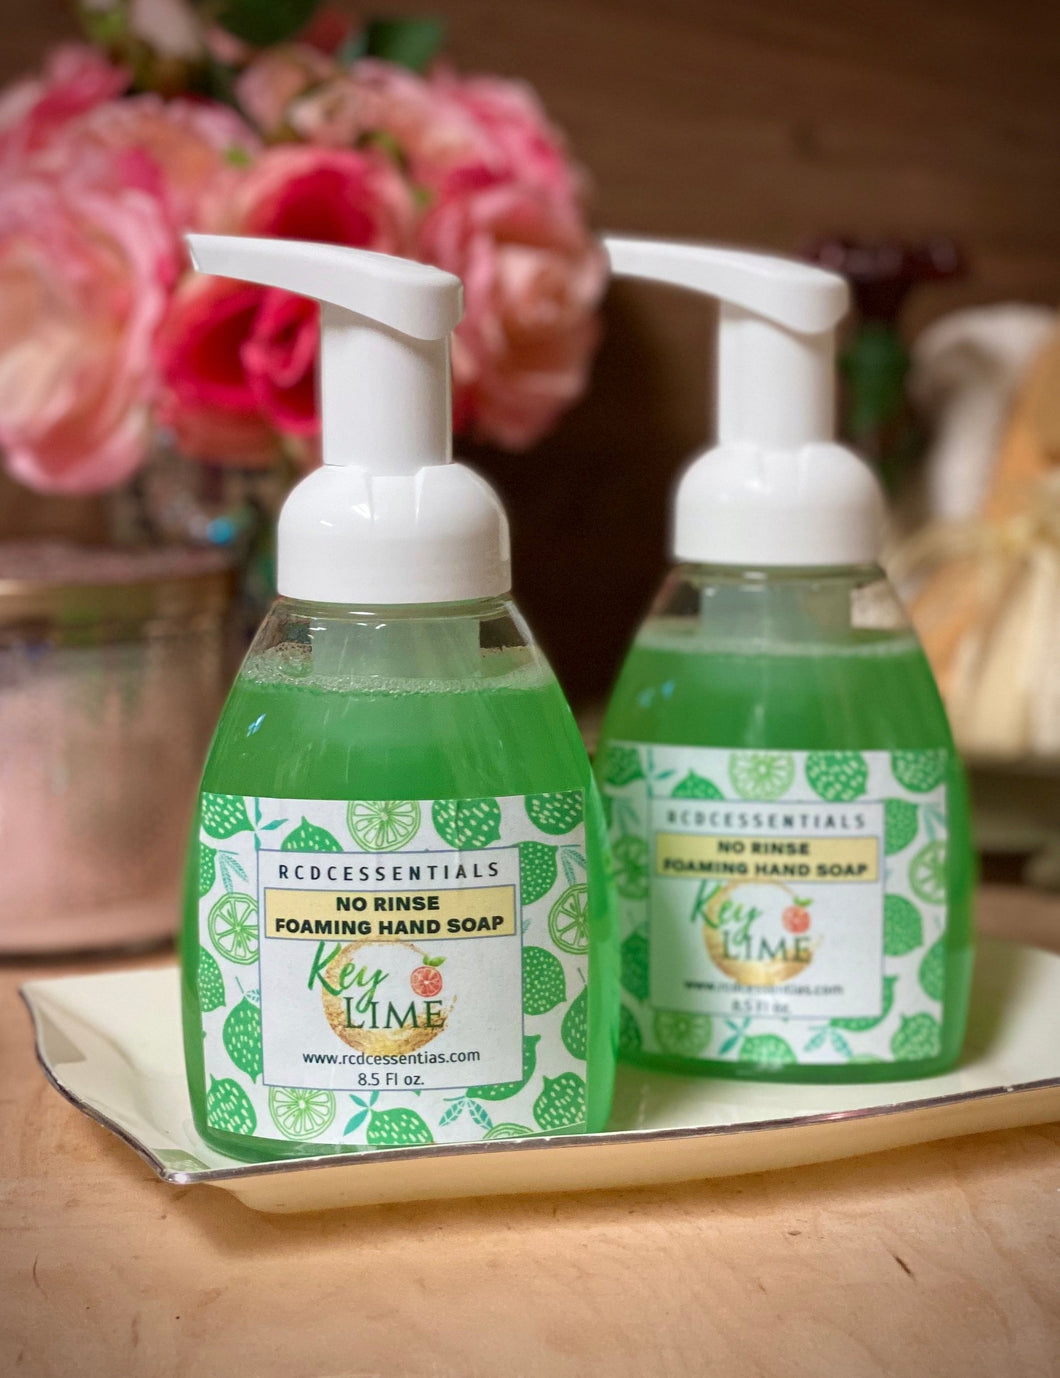 Key Lime ~ No Rinse Foaming Hand Wash Cleans Hands Without The Use Of Water!